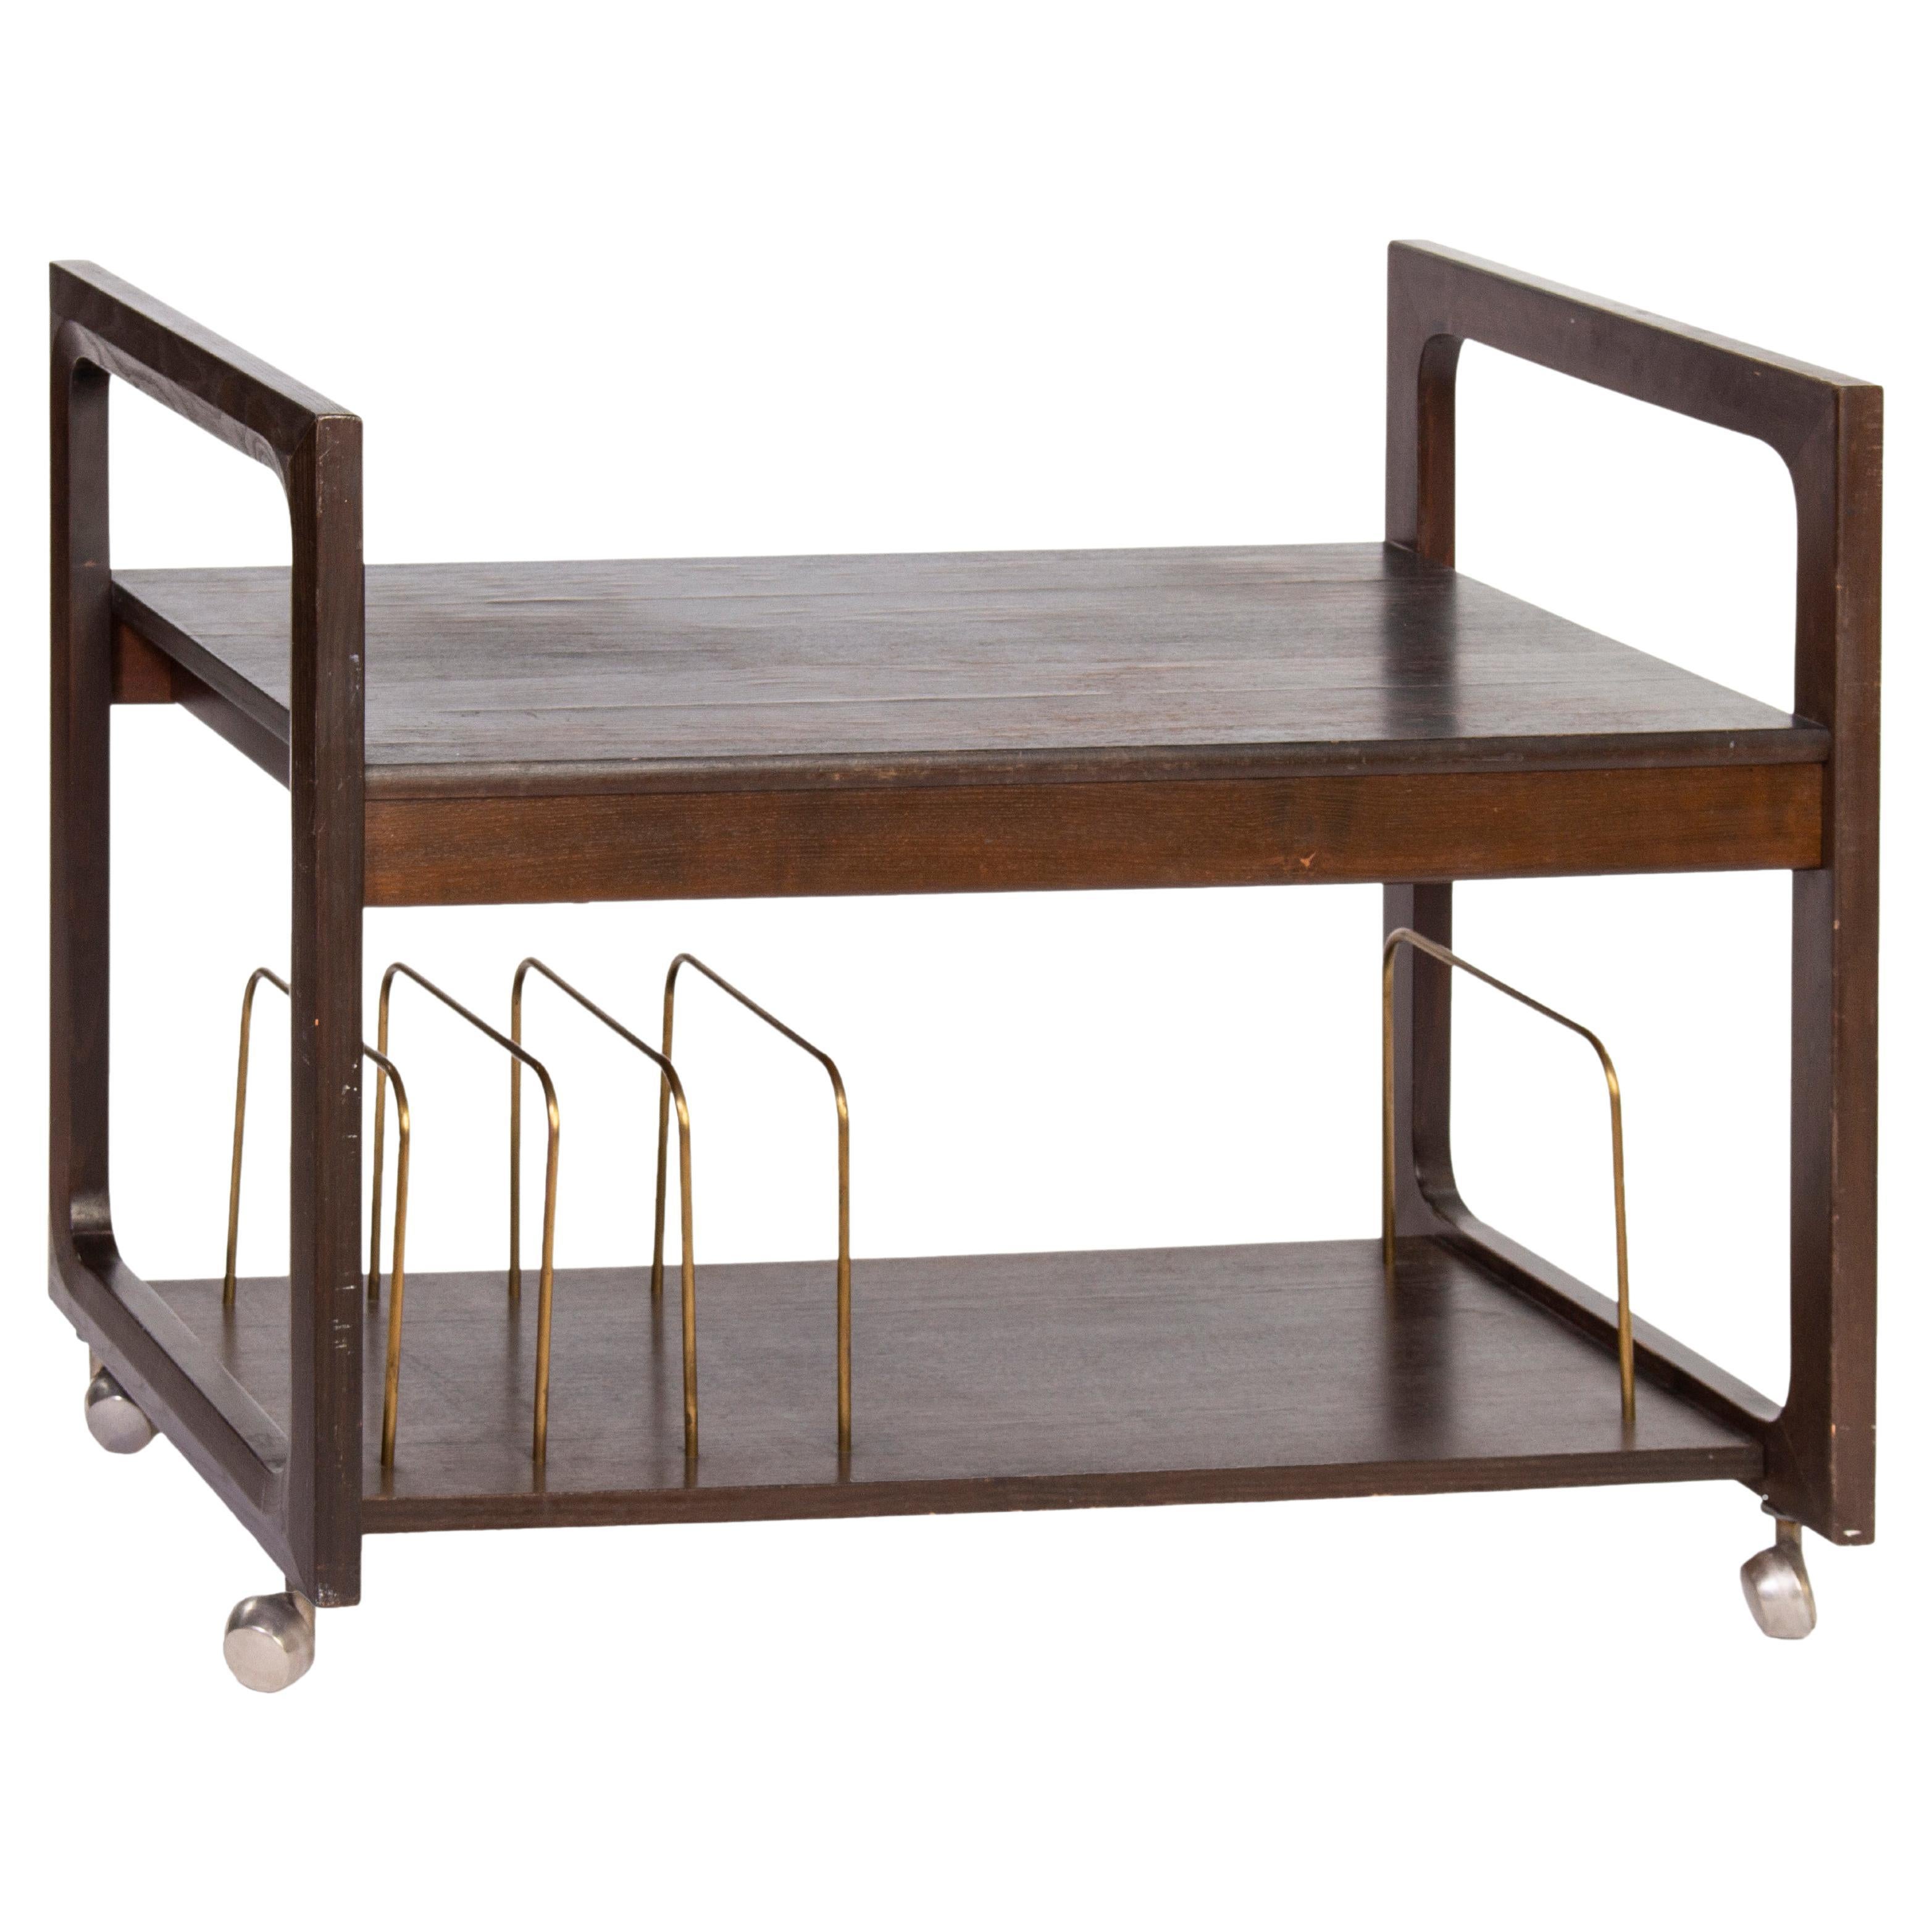 Minimalist Mid-Century Modern bar cart. The wooden structure is complemented with elegant brass guiding placeholders. The two-storey bar cart rolls on four wheels and fits into Classic and contemporary places.